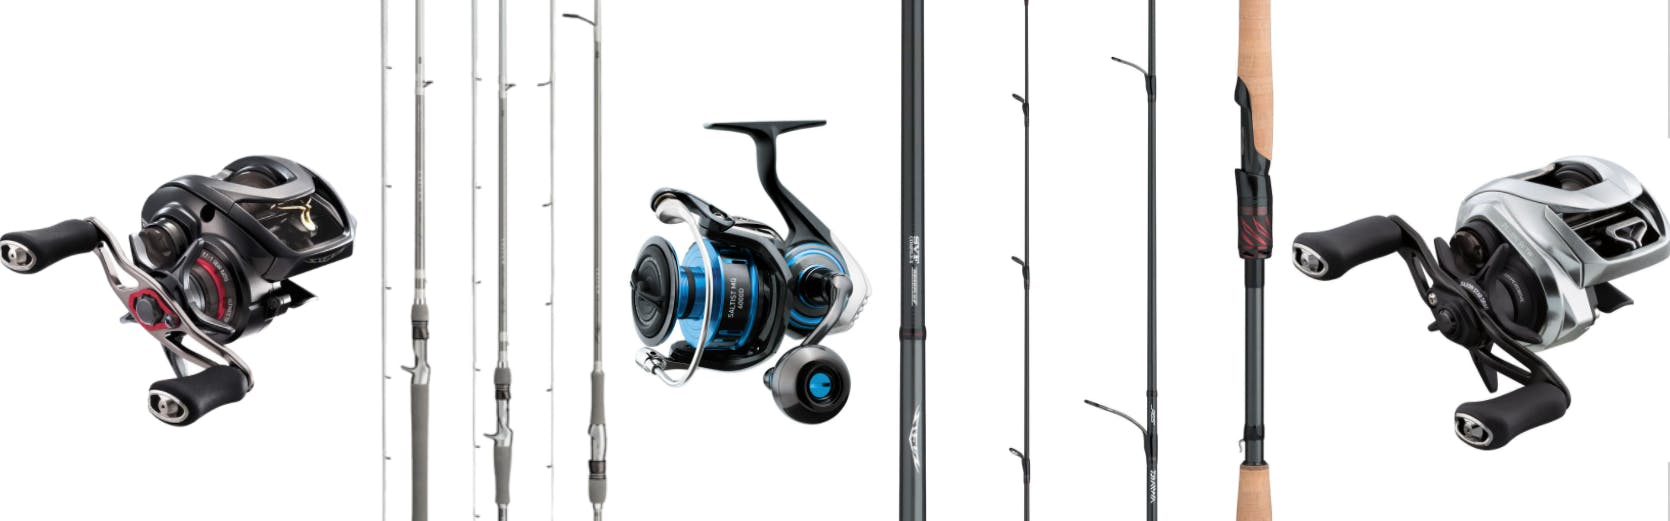 How-To Spool a Baitcasting Reel, TW Learning  Center👉 One of the most crucial steps before you  enjoy a day out on the water is getting line on your reel properly.